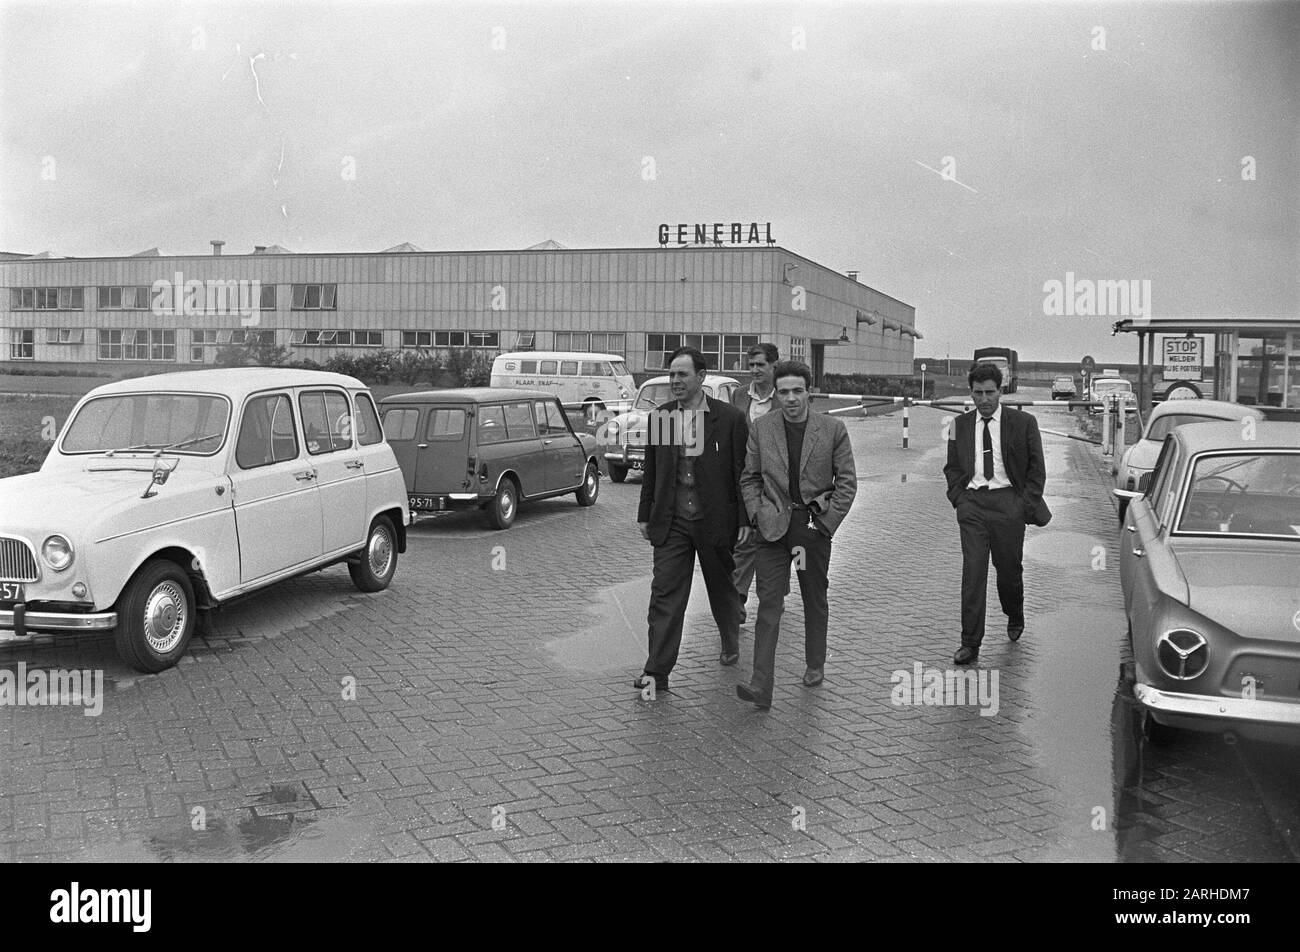 Six hundred men fired at General Tires in Amsterdam workers for closed factory Date: 24 May 1967 Location: Amsterdam, Noord-Holland Keywords: WORKERS, LASSED, factories Personal name: General Tires Stock Photo